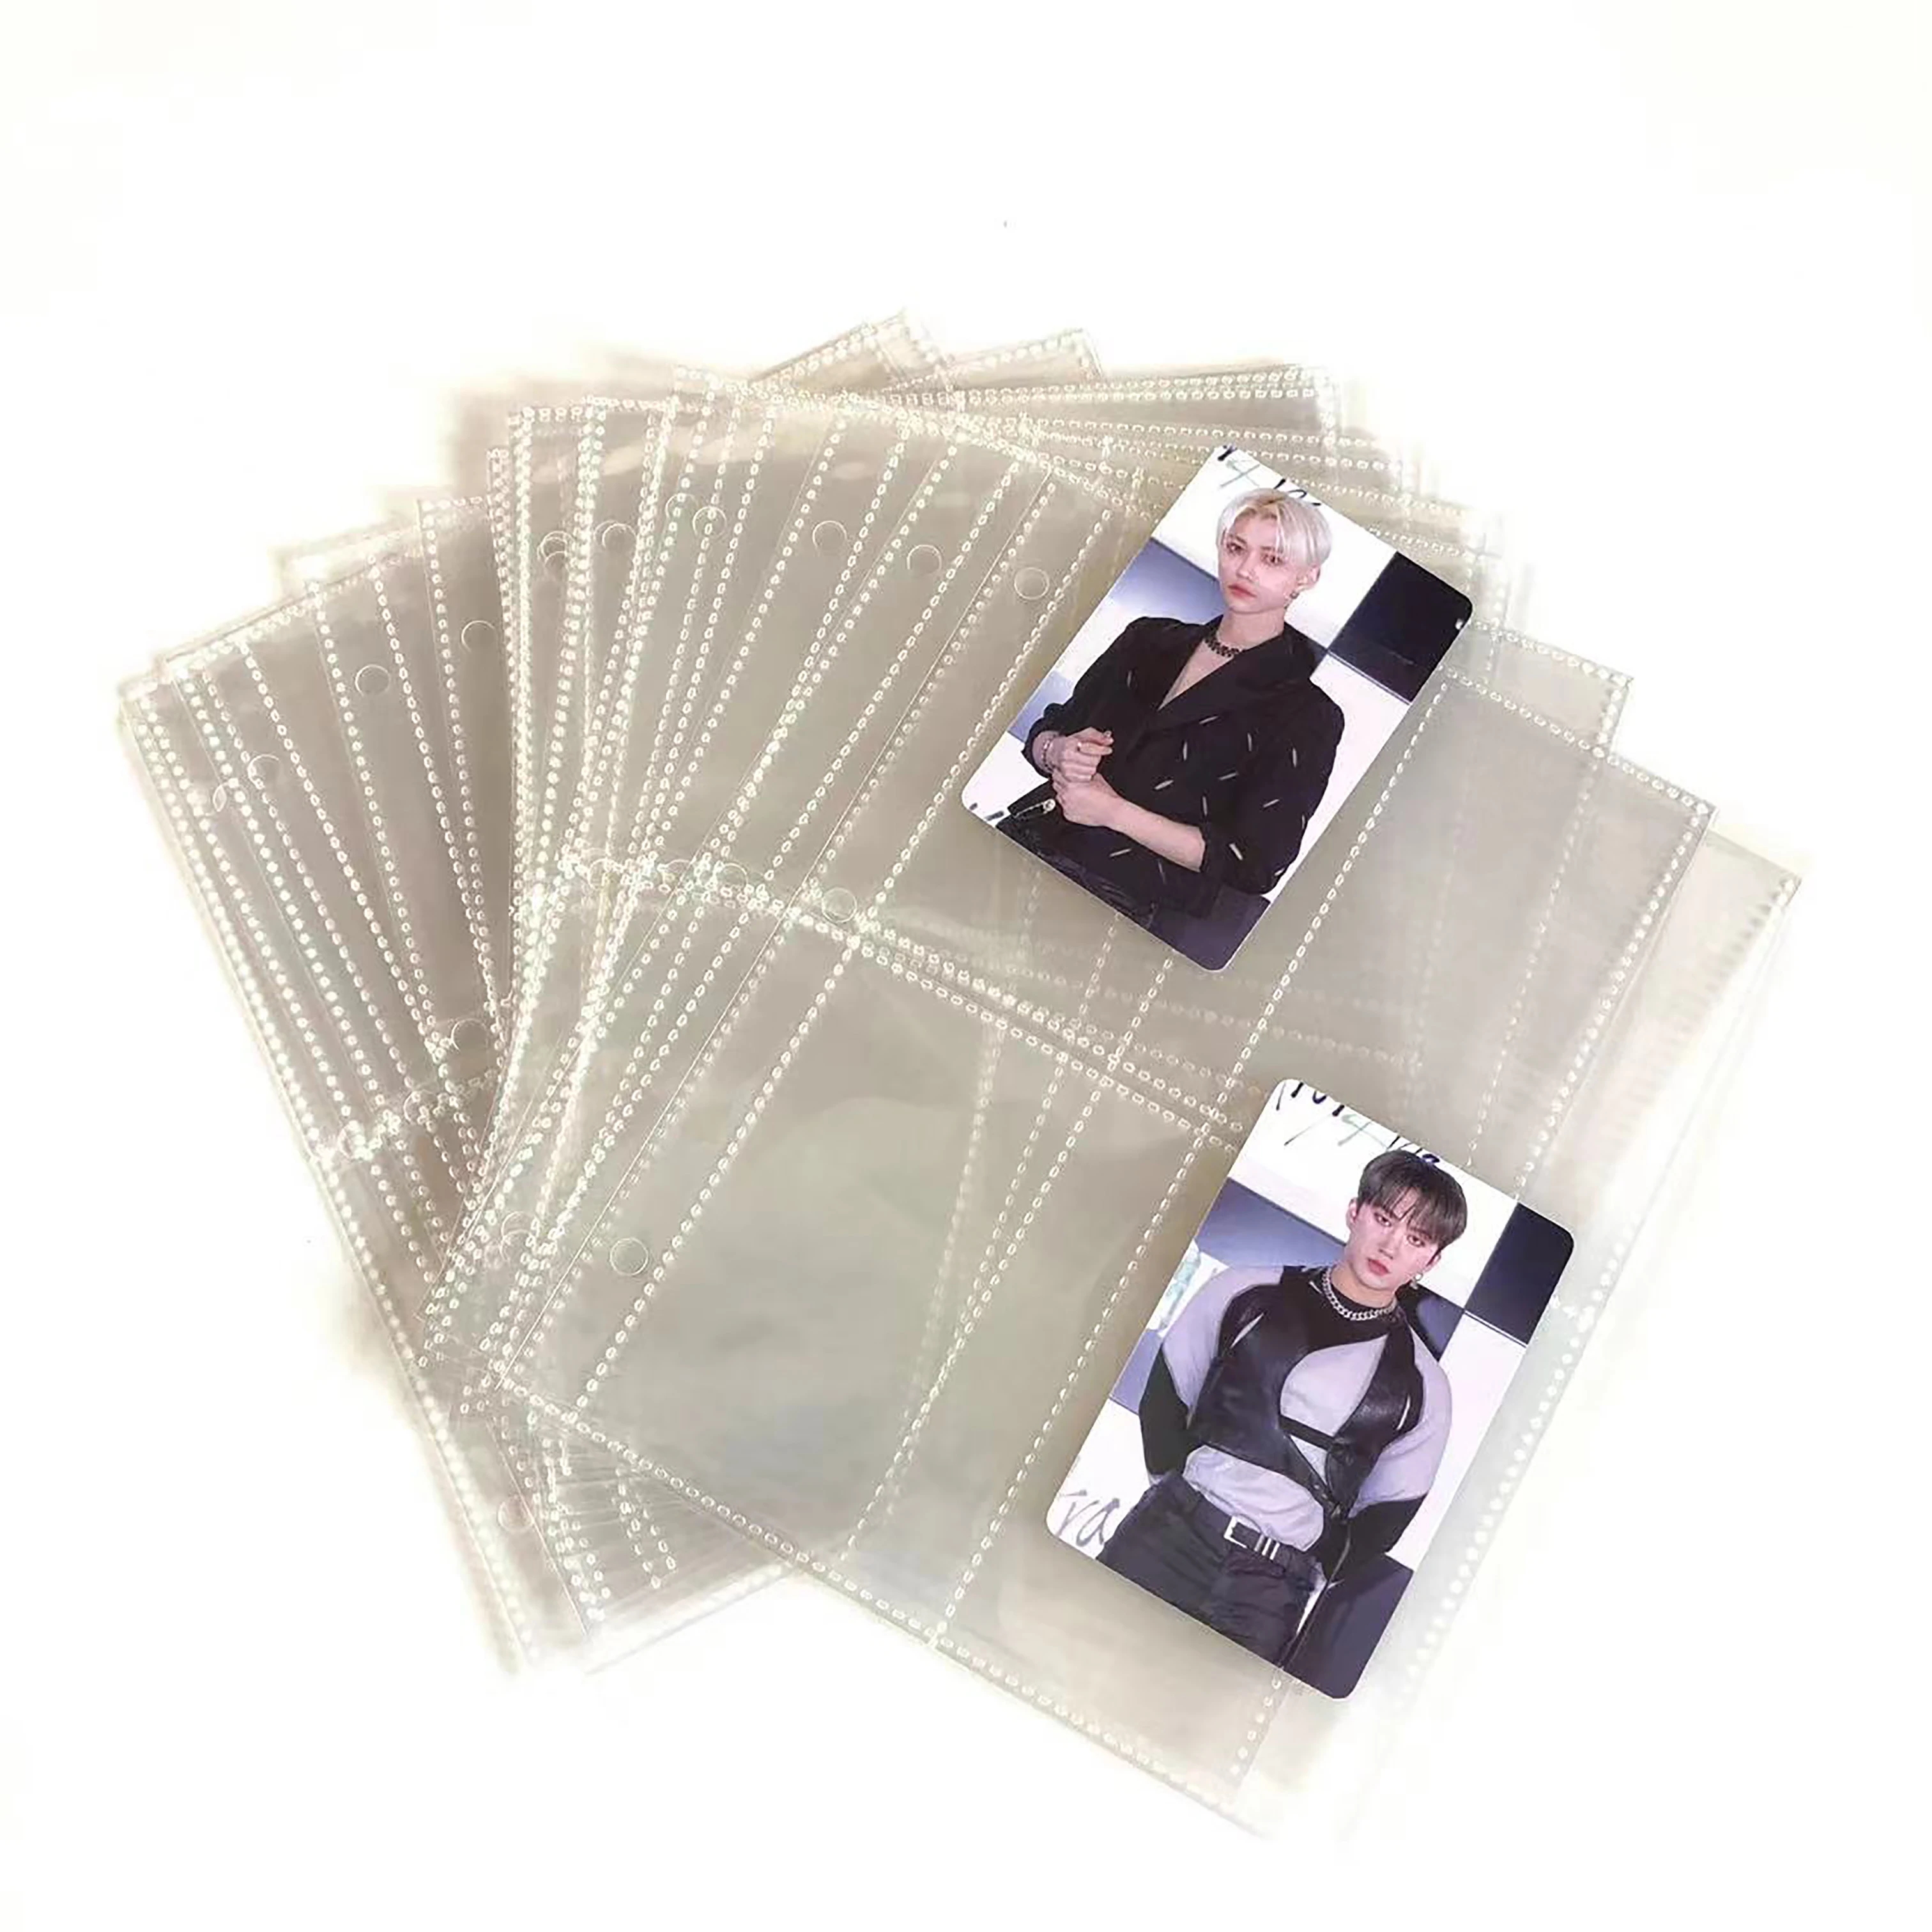 Photocard Kpop Binder 25 Sheets 200 Pockets 4 Inch Photo Album Sleeves in  Loose Leaf Refillable A5 6 Rings Photo Binder - AliExpress